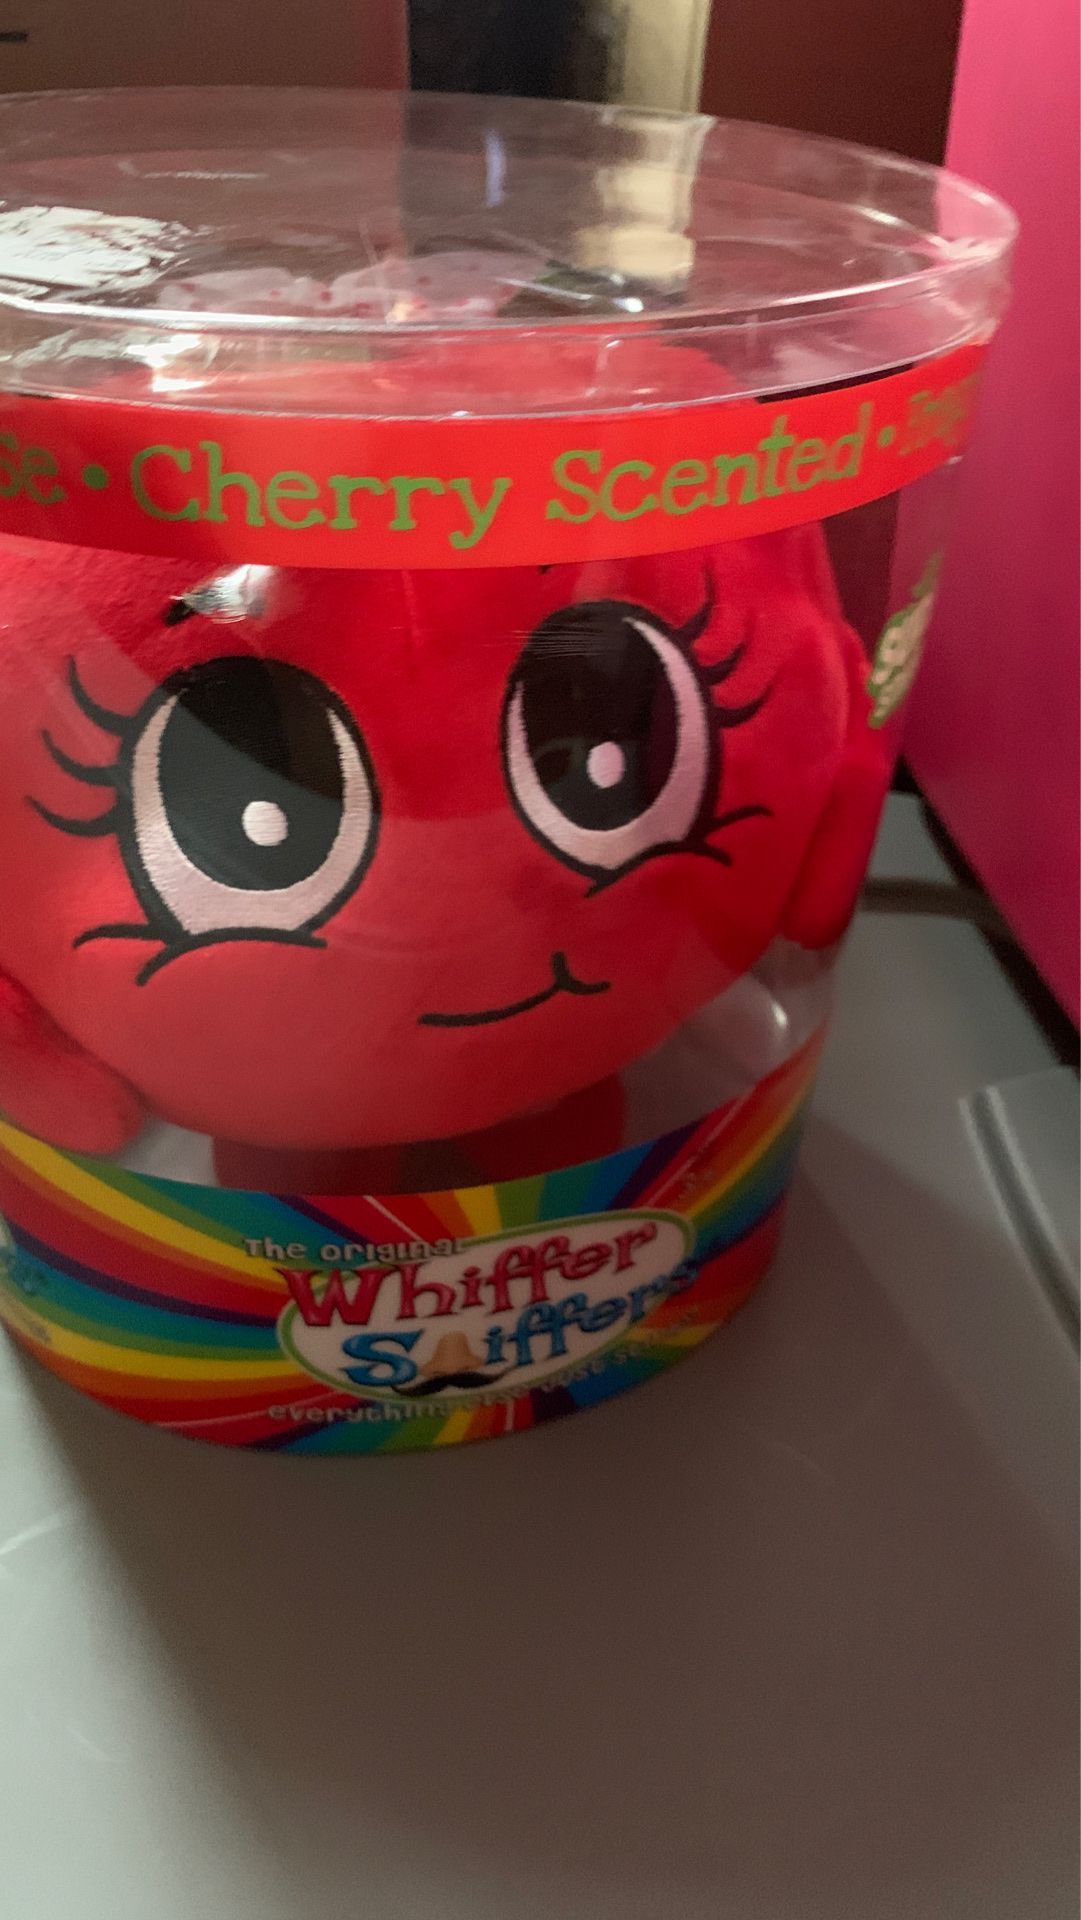 Whiffer sniffer snuggle cherry